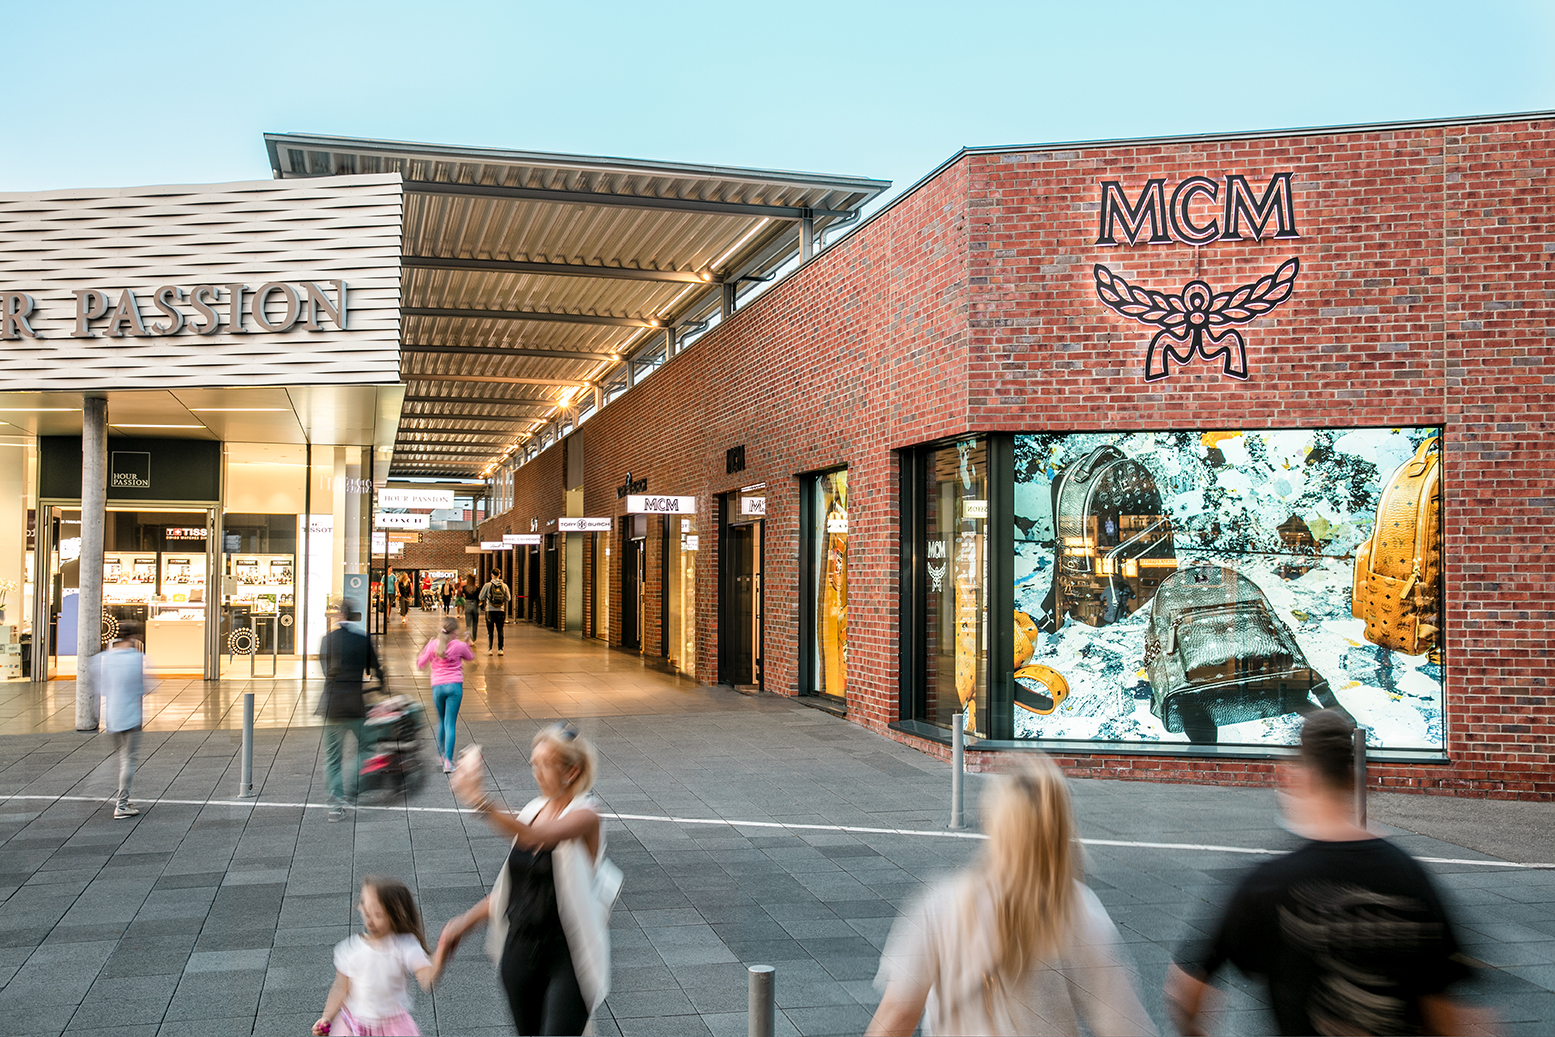 Outletcity Metzingen:-The city of Fashion